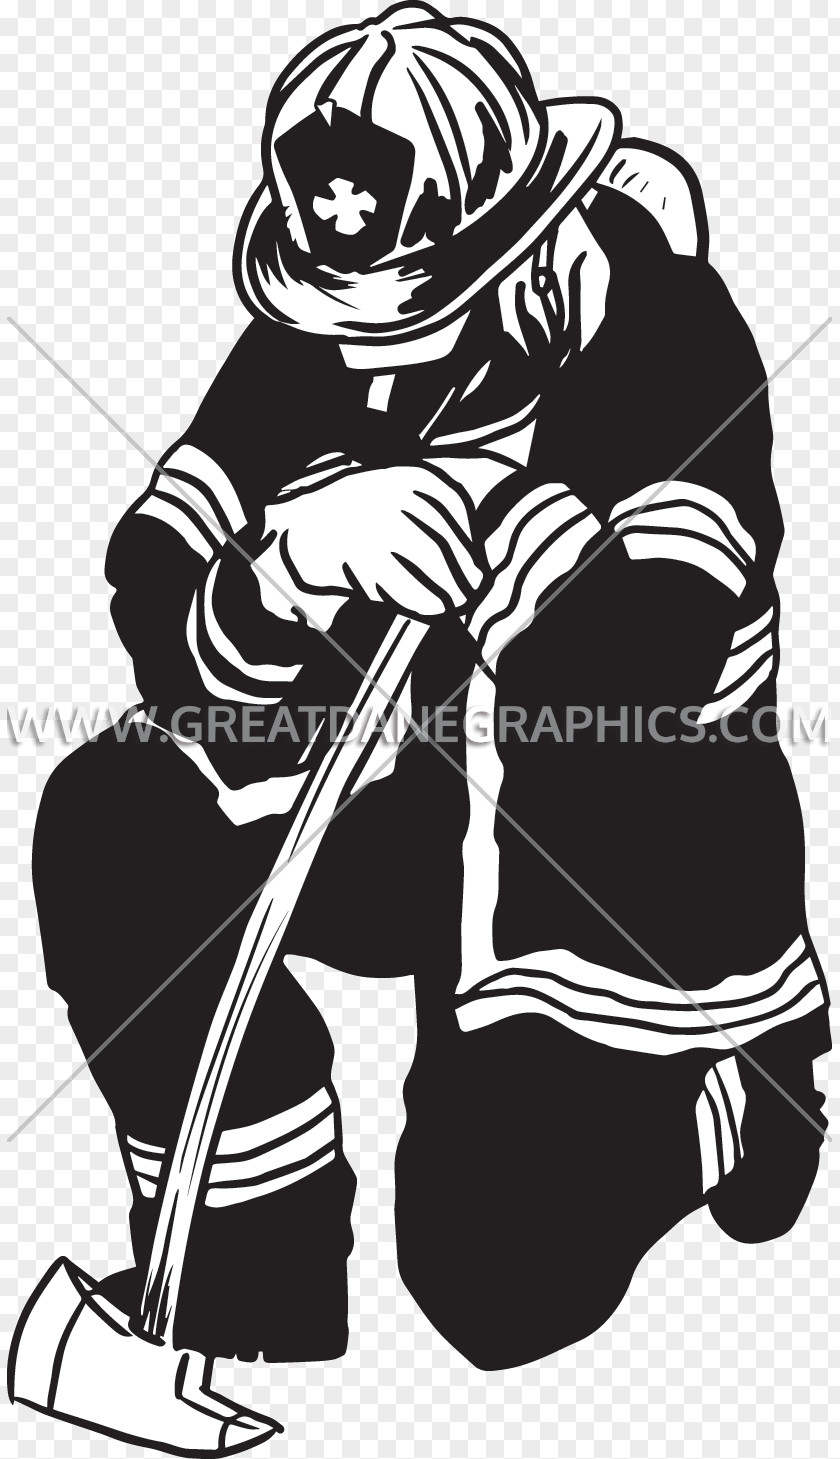 Firefighter Drawing Black And White Clip Art PNG